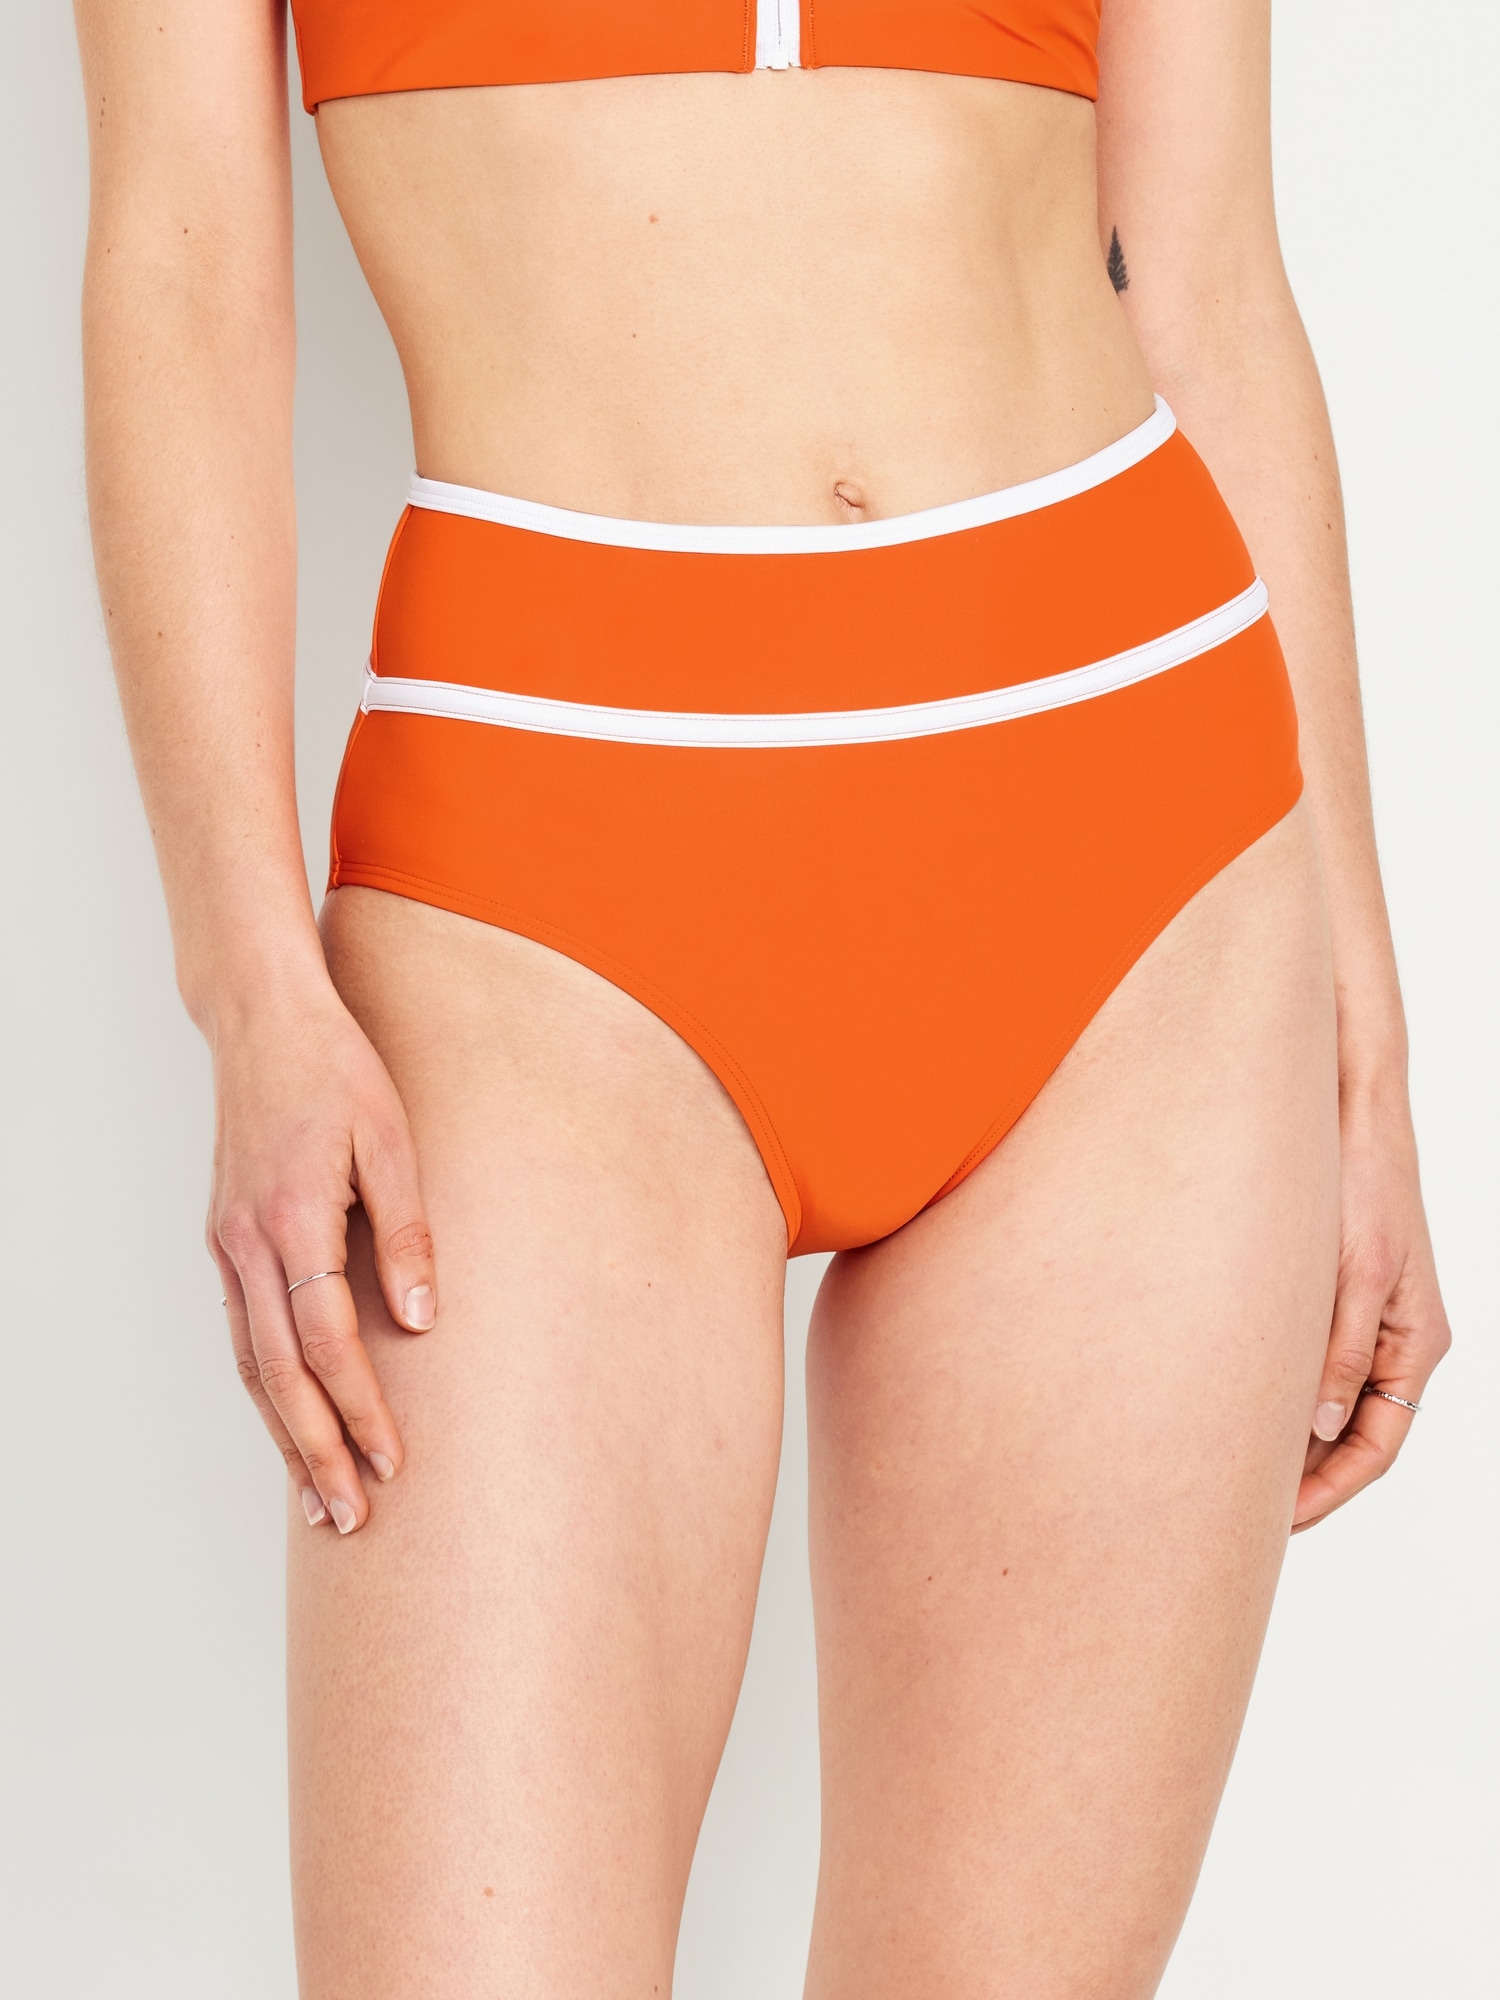 Old Navy High-Waisted Boyshort Swim Bottoms, 13 Old Navy Bottoms That Come  Up So High, They'll Practically Kiss Your Bikini Top